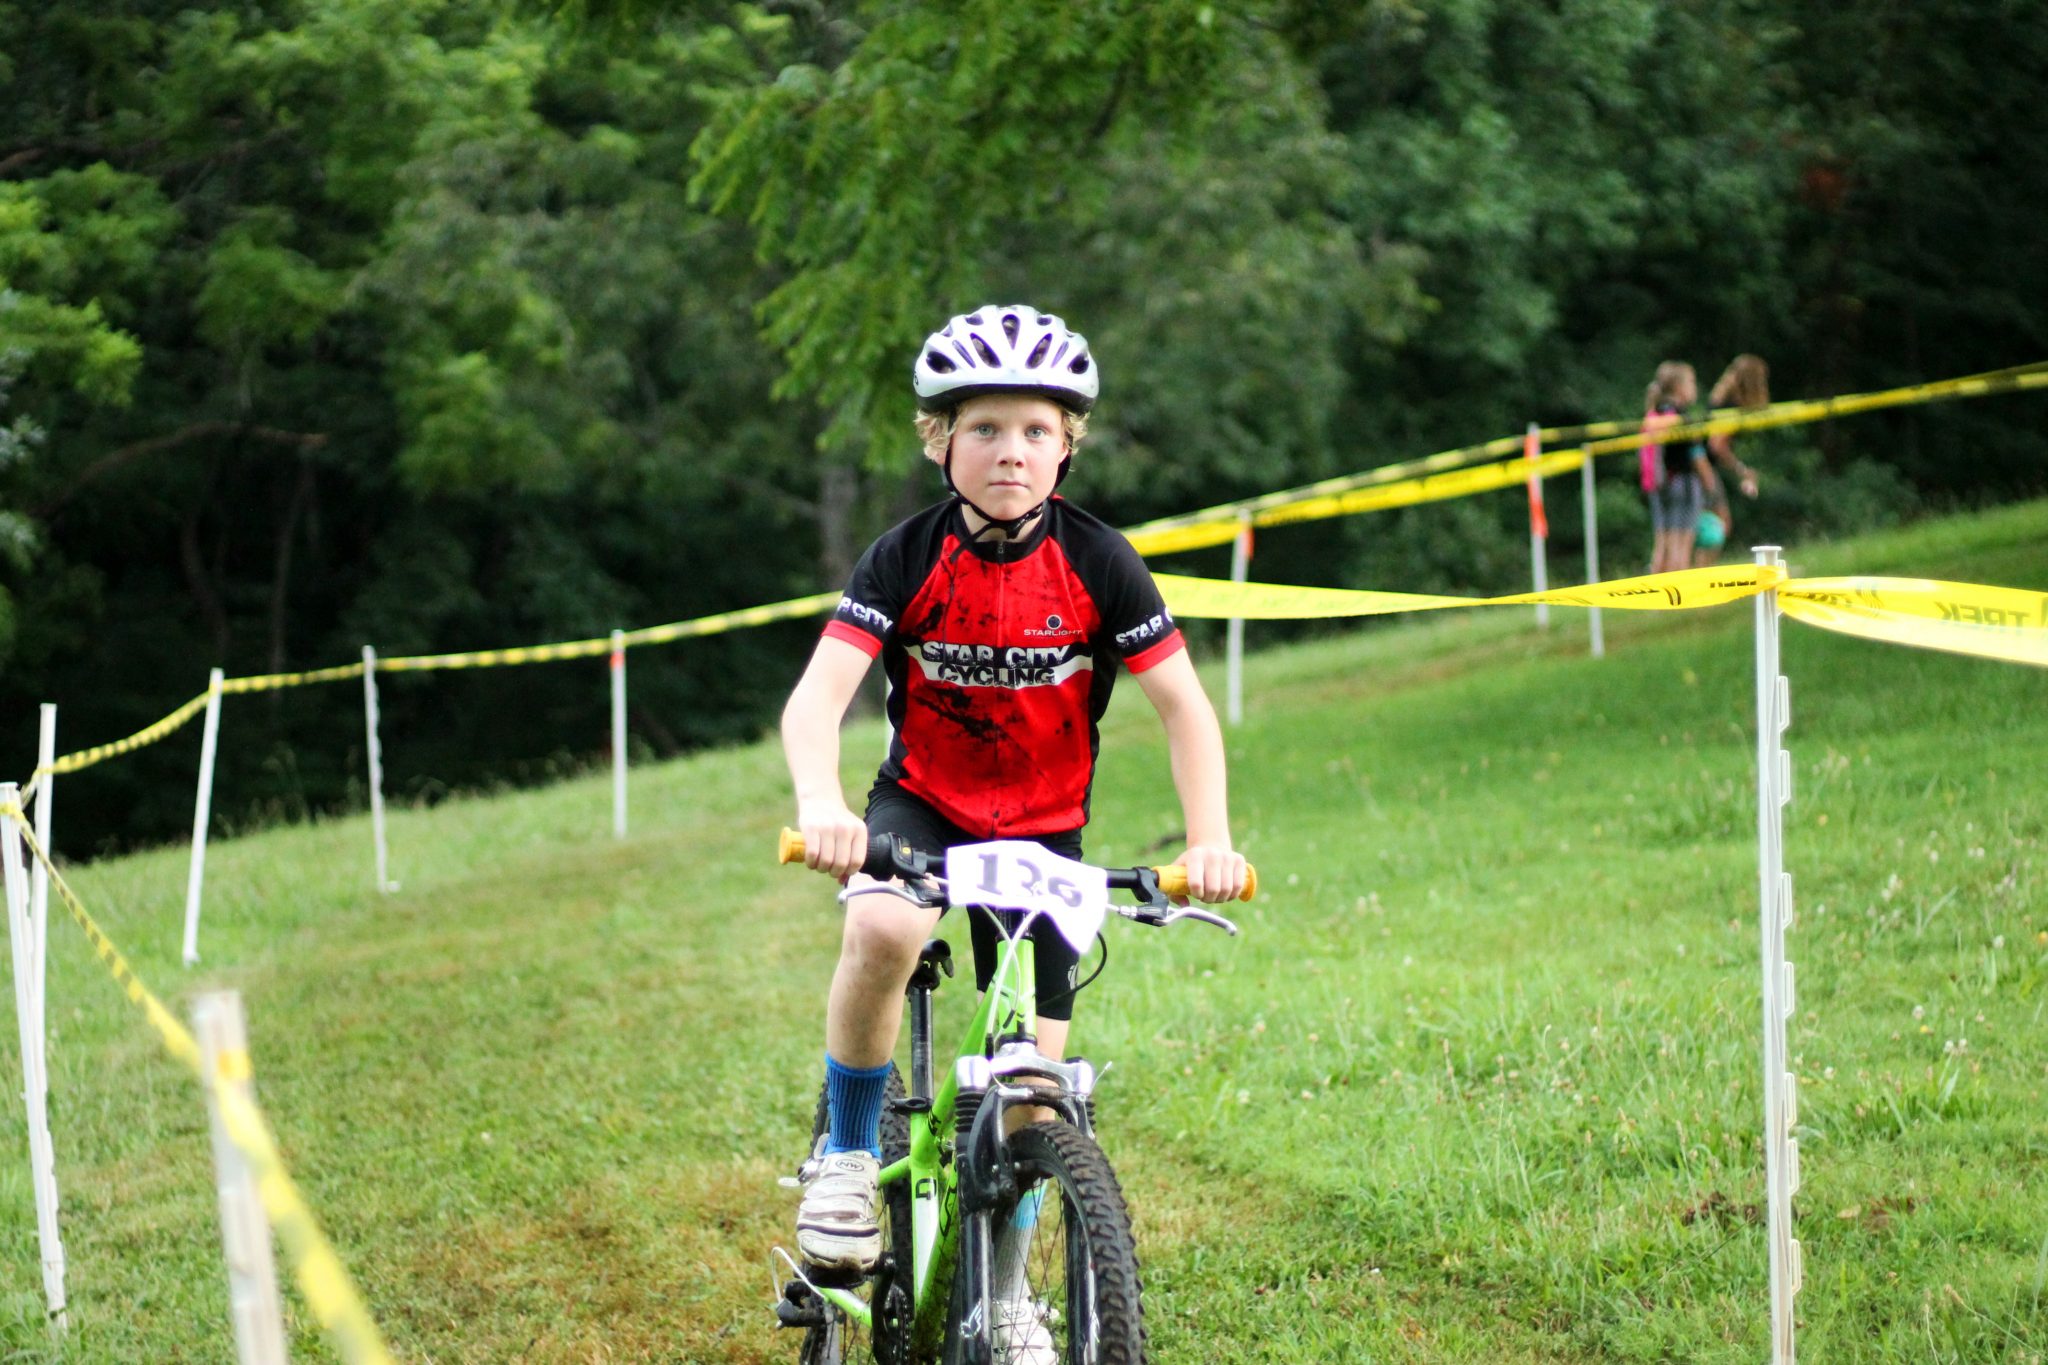 Fishburn youth mountain biker rides downhill at the Roanoke Parks and Recreation event